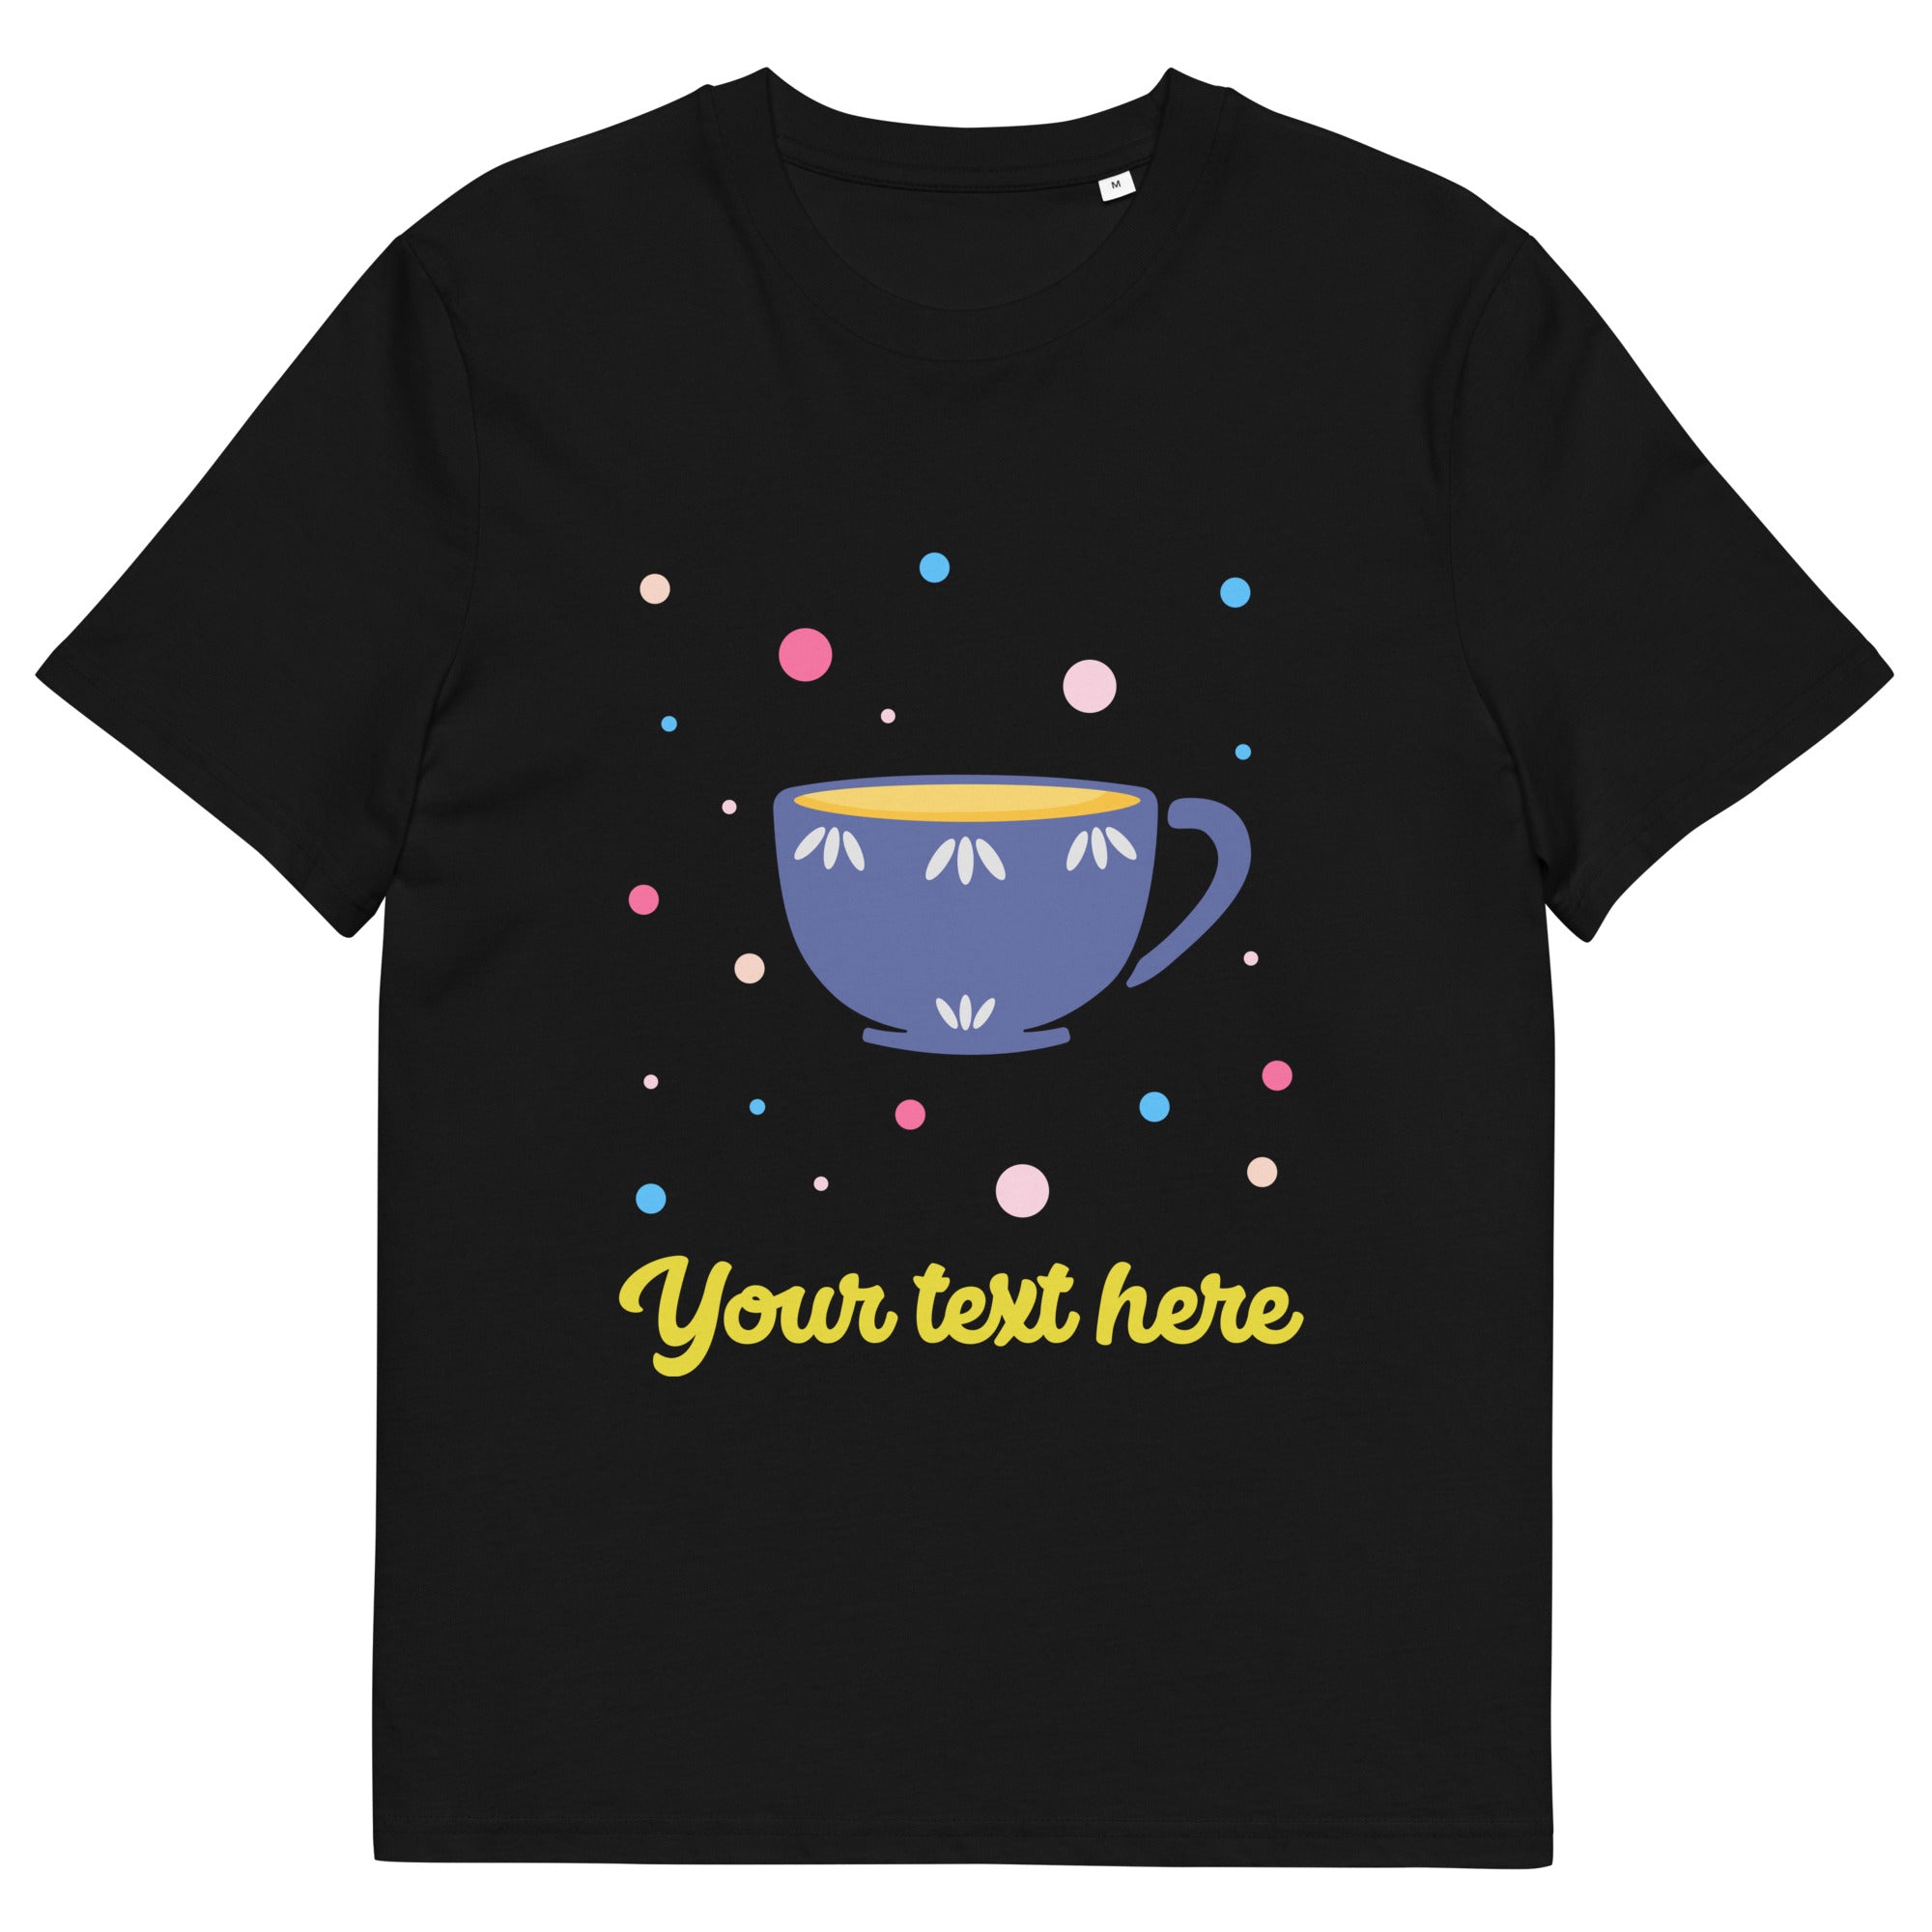 Personalised Custom Text - Organic Cotton Adults Unisex T-Shirt - London Doodles - Cup Of Tea - Black